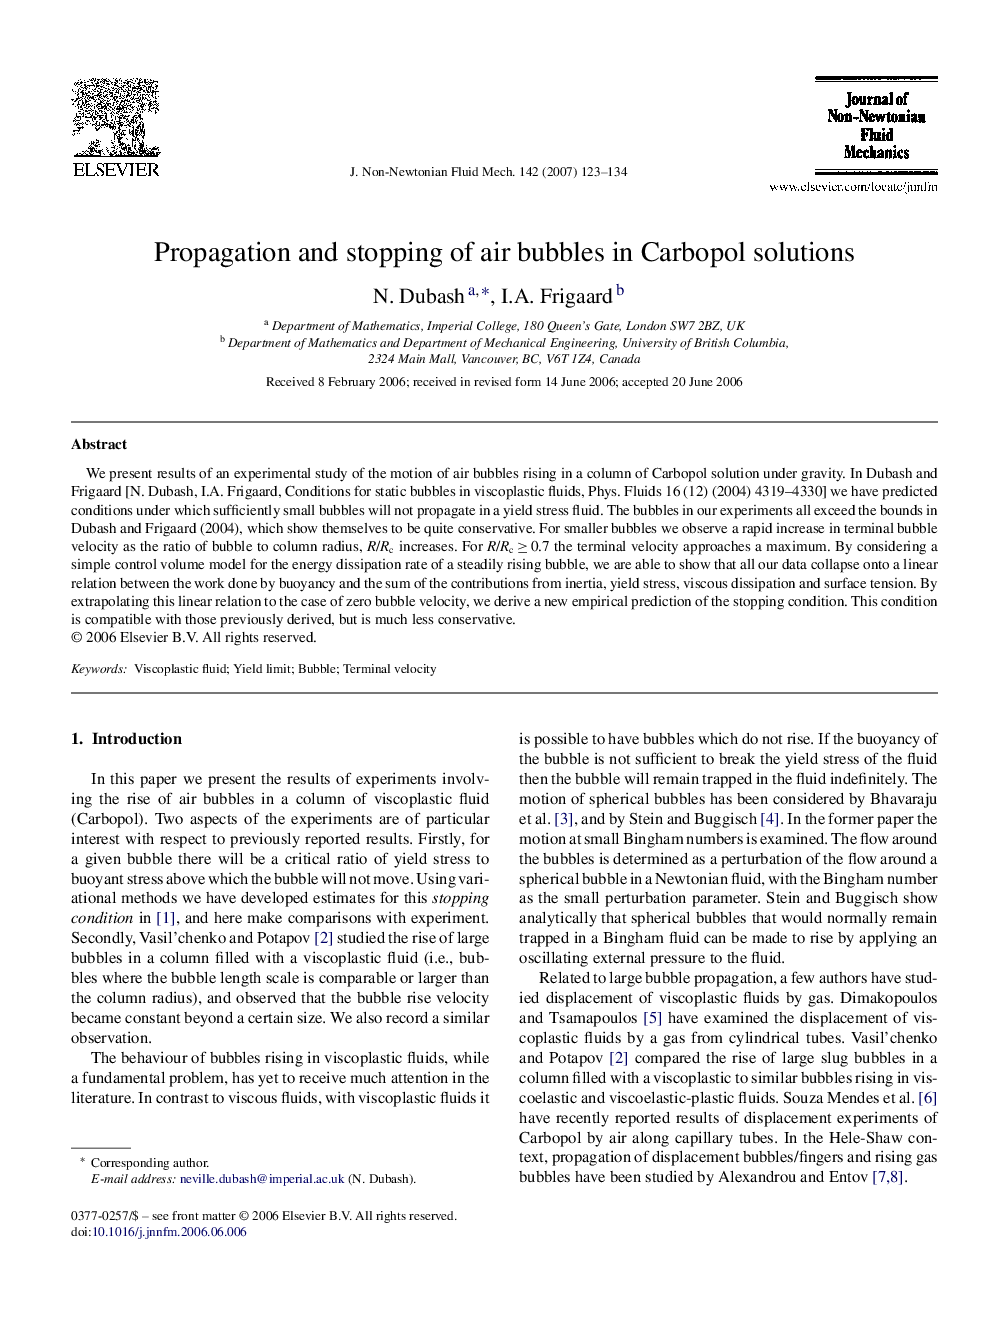 Propagation and stopping of air bubbles in Carbopol solutions